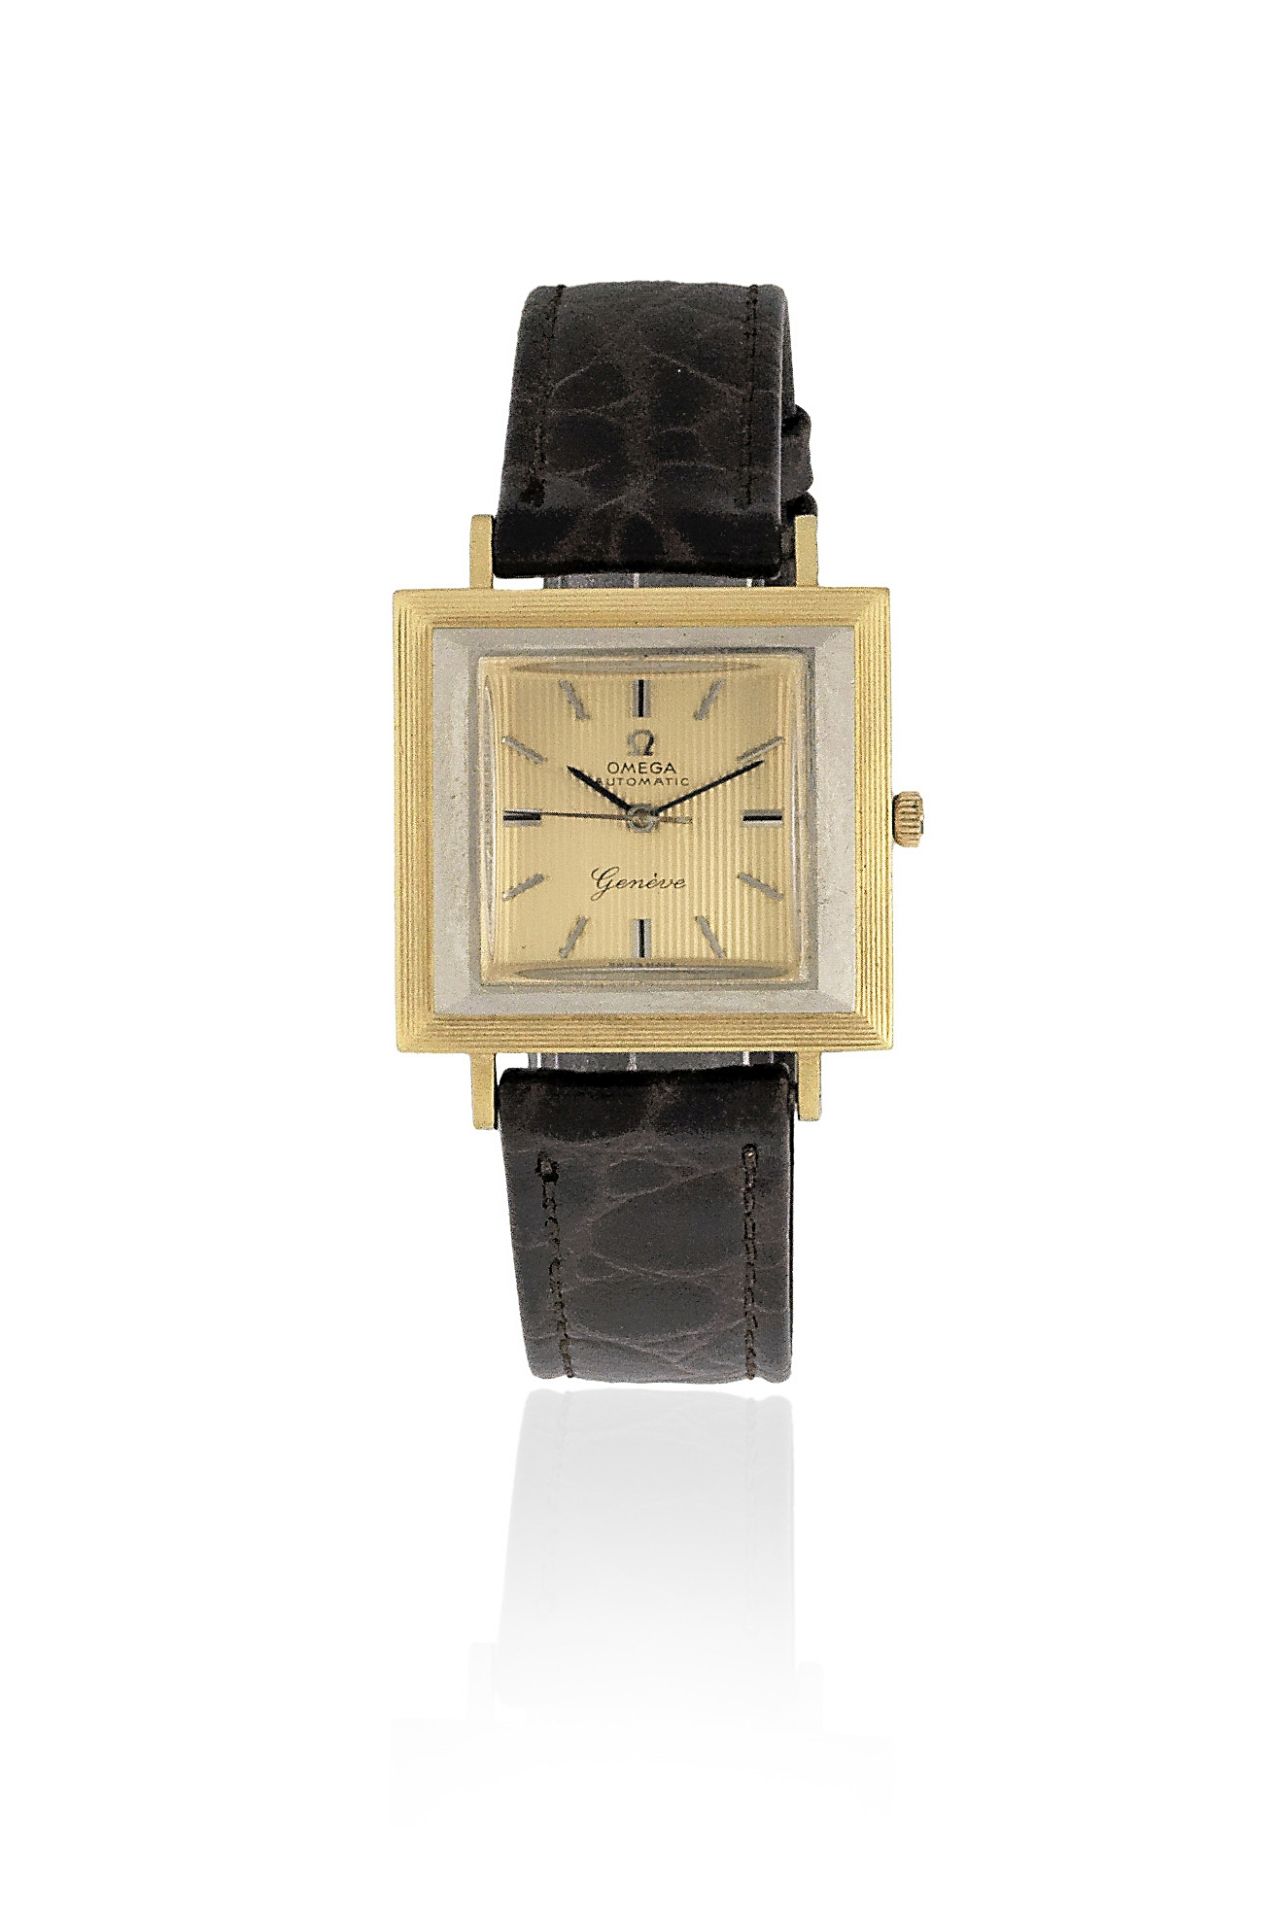 Omega. An 18K gold and platinum automatic square wristwatch Circa 1965